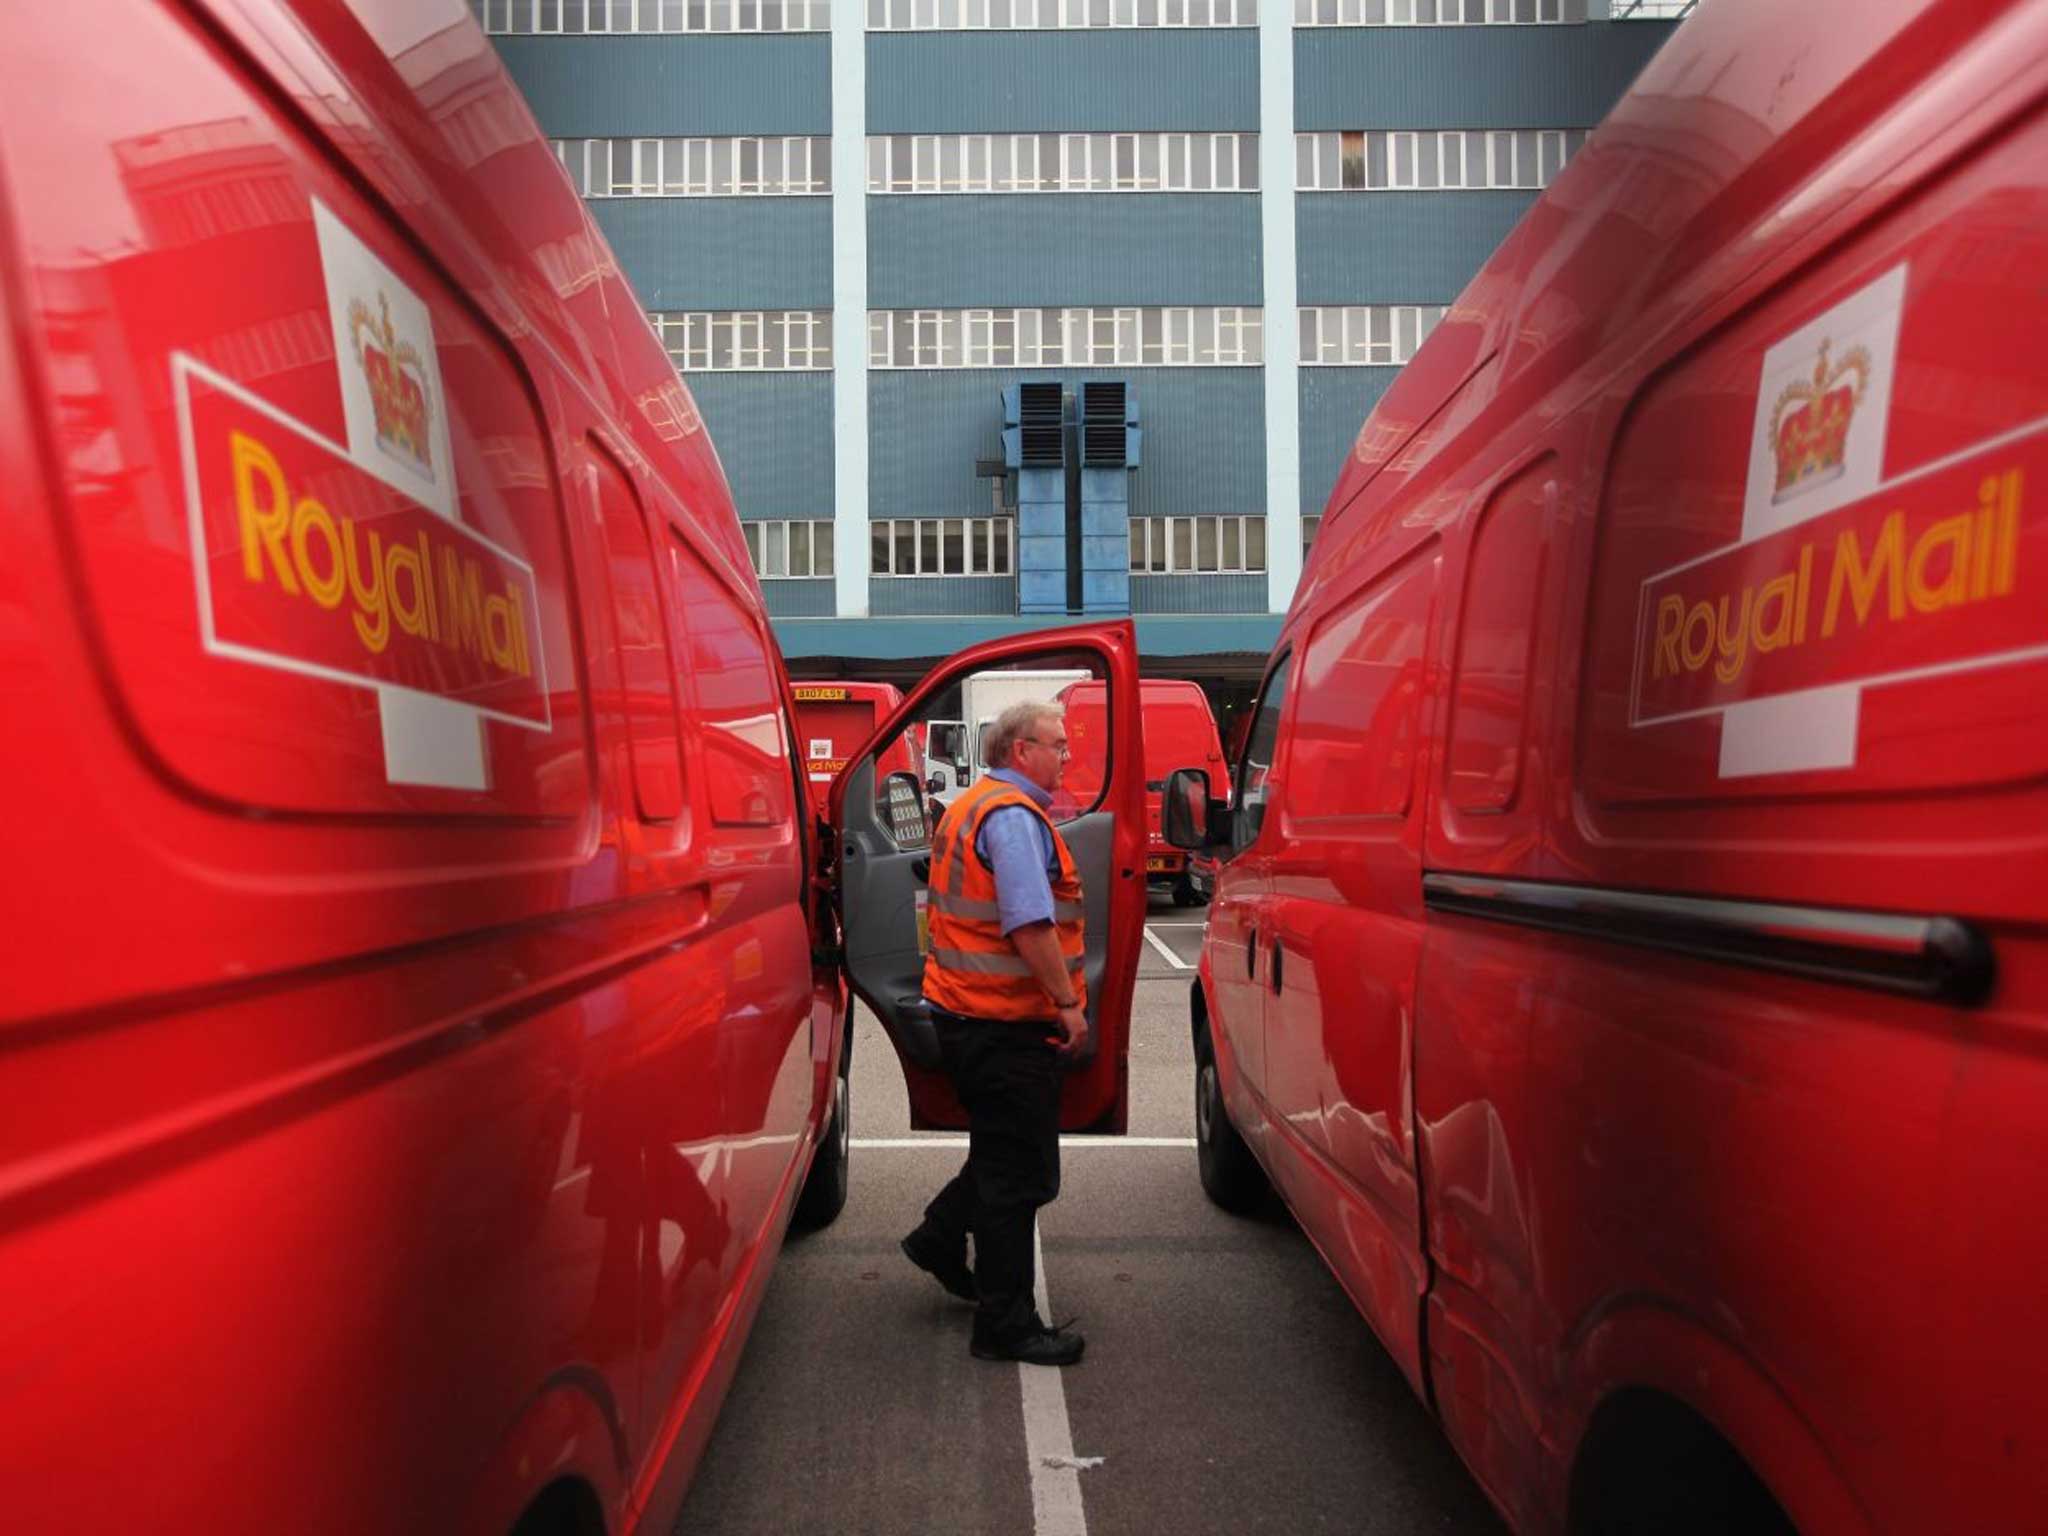 The privatisation of the Royal Mail was criticised by the National Audit office earlier this month